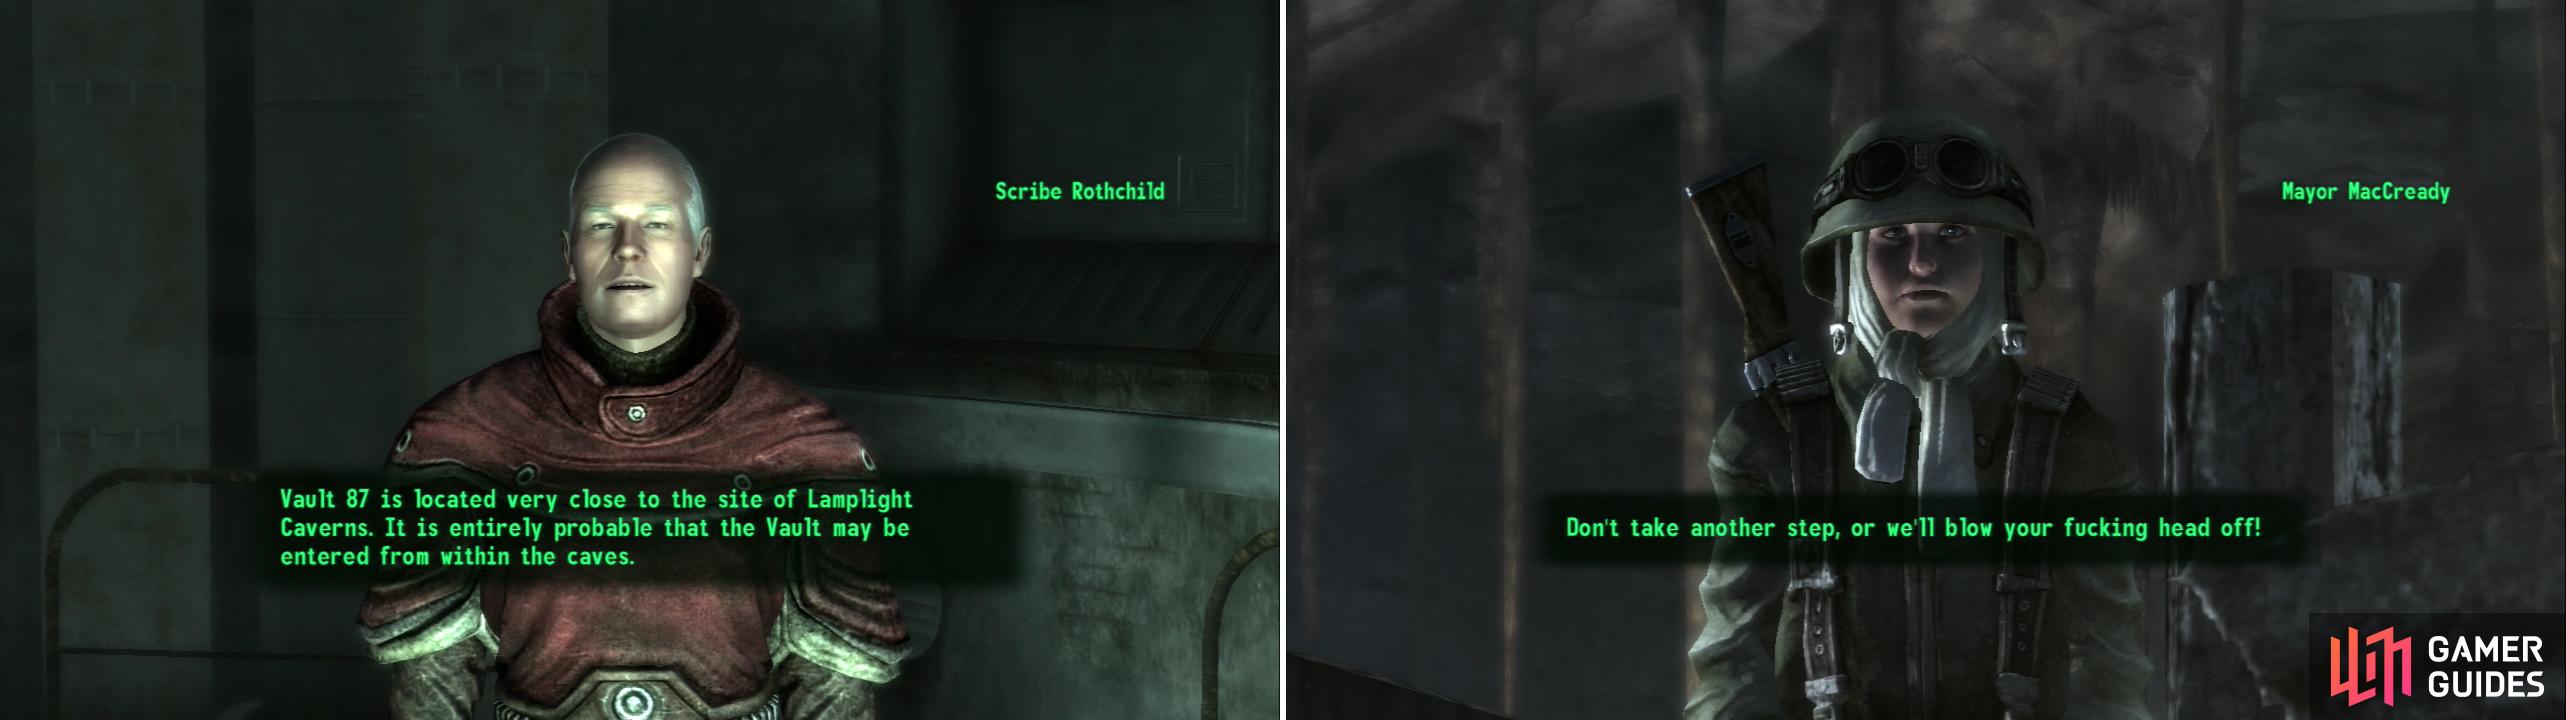 Scribe Rothchild will point you towards the Lamplight Caverns, through which we might reach Vault 87 (left). but Little Lamplight isn’t unnoccupied-you’ll have to deal with Mayor MacCready to gain access (right).